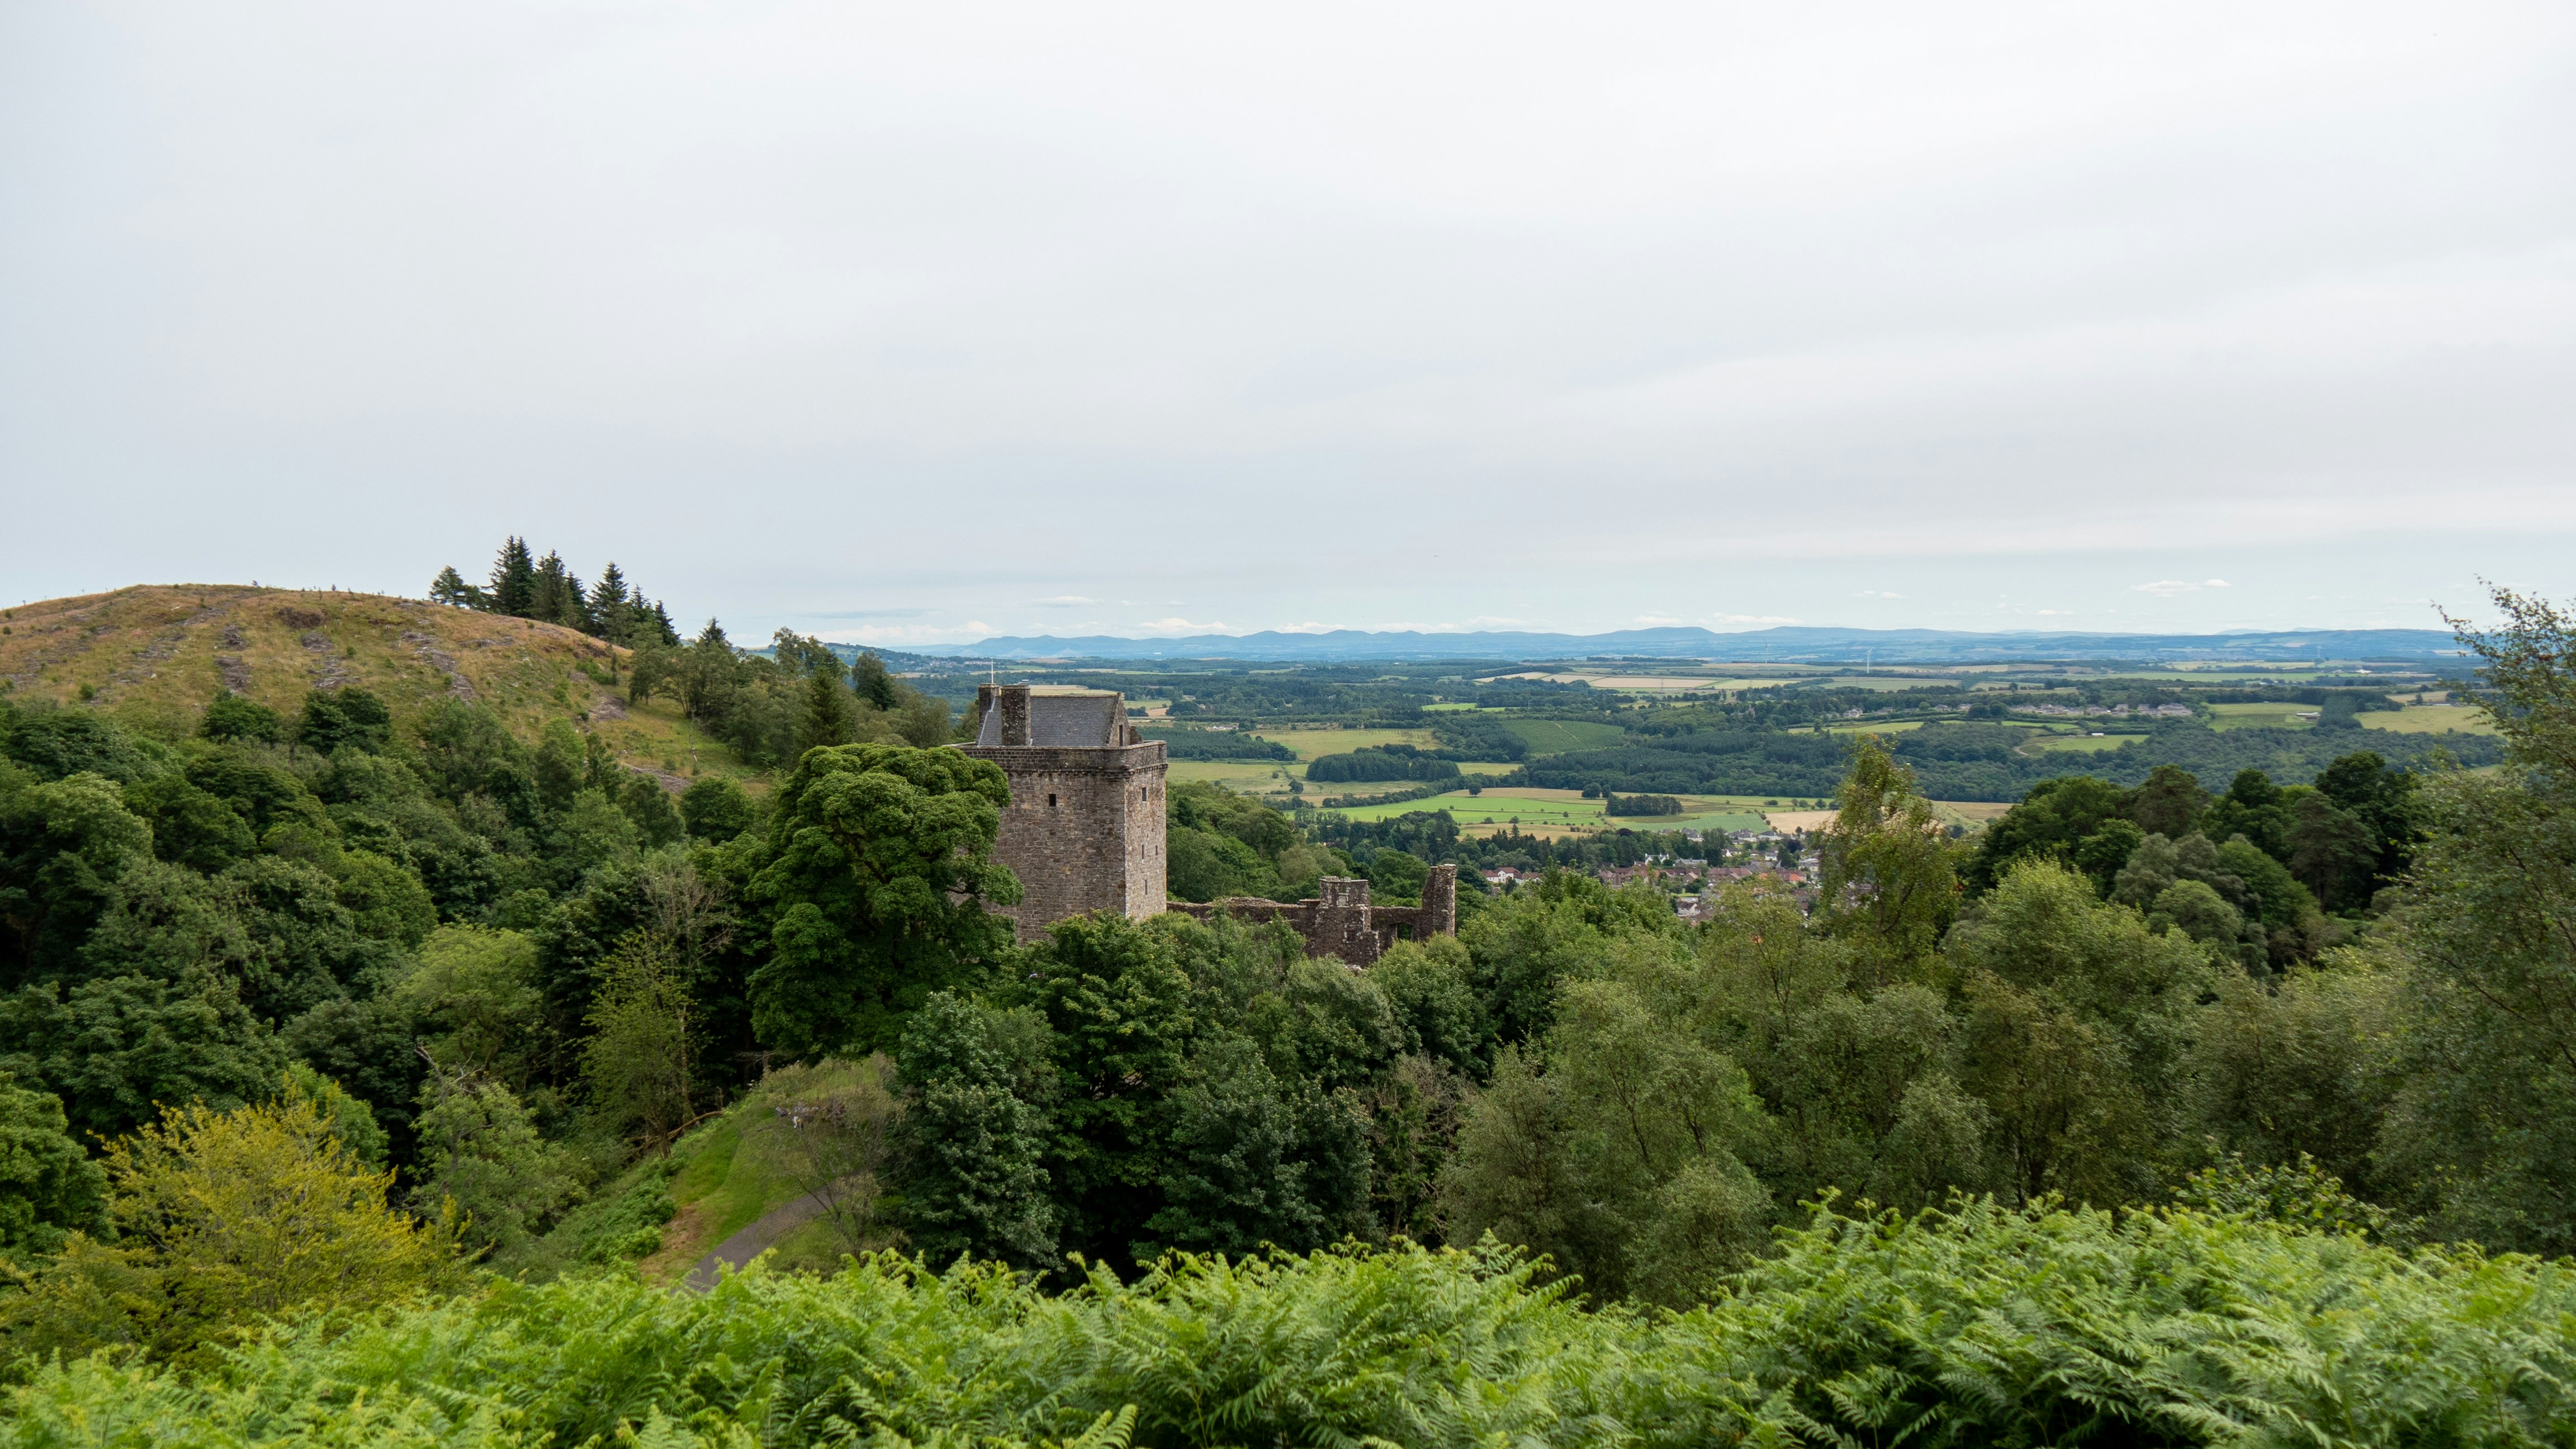 Castle Campbell perched above the small Scottish town of Dollar looking over the Forth Valley.